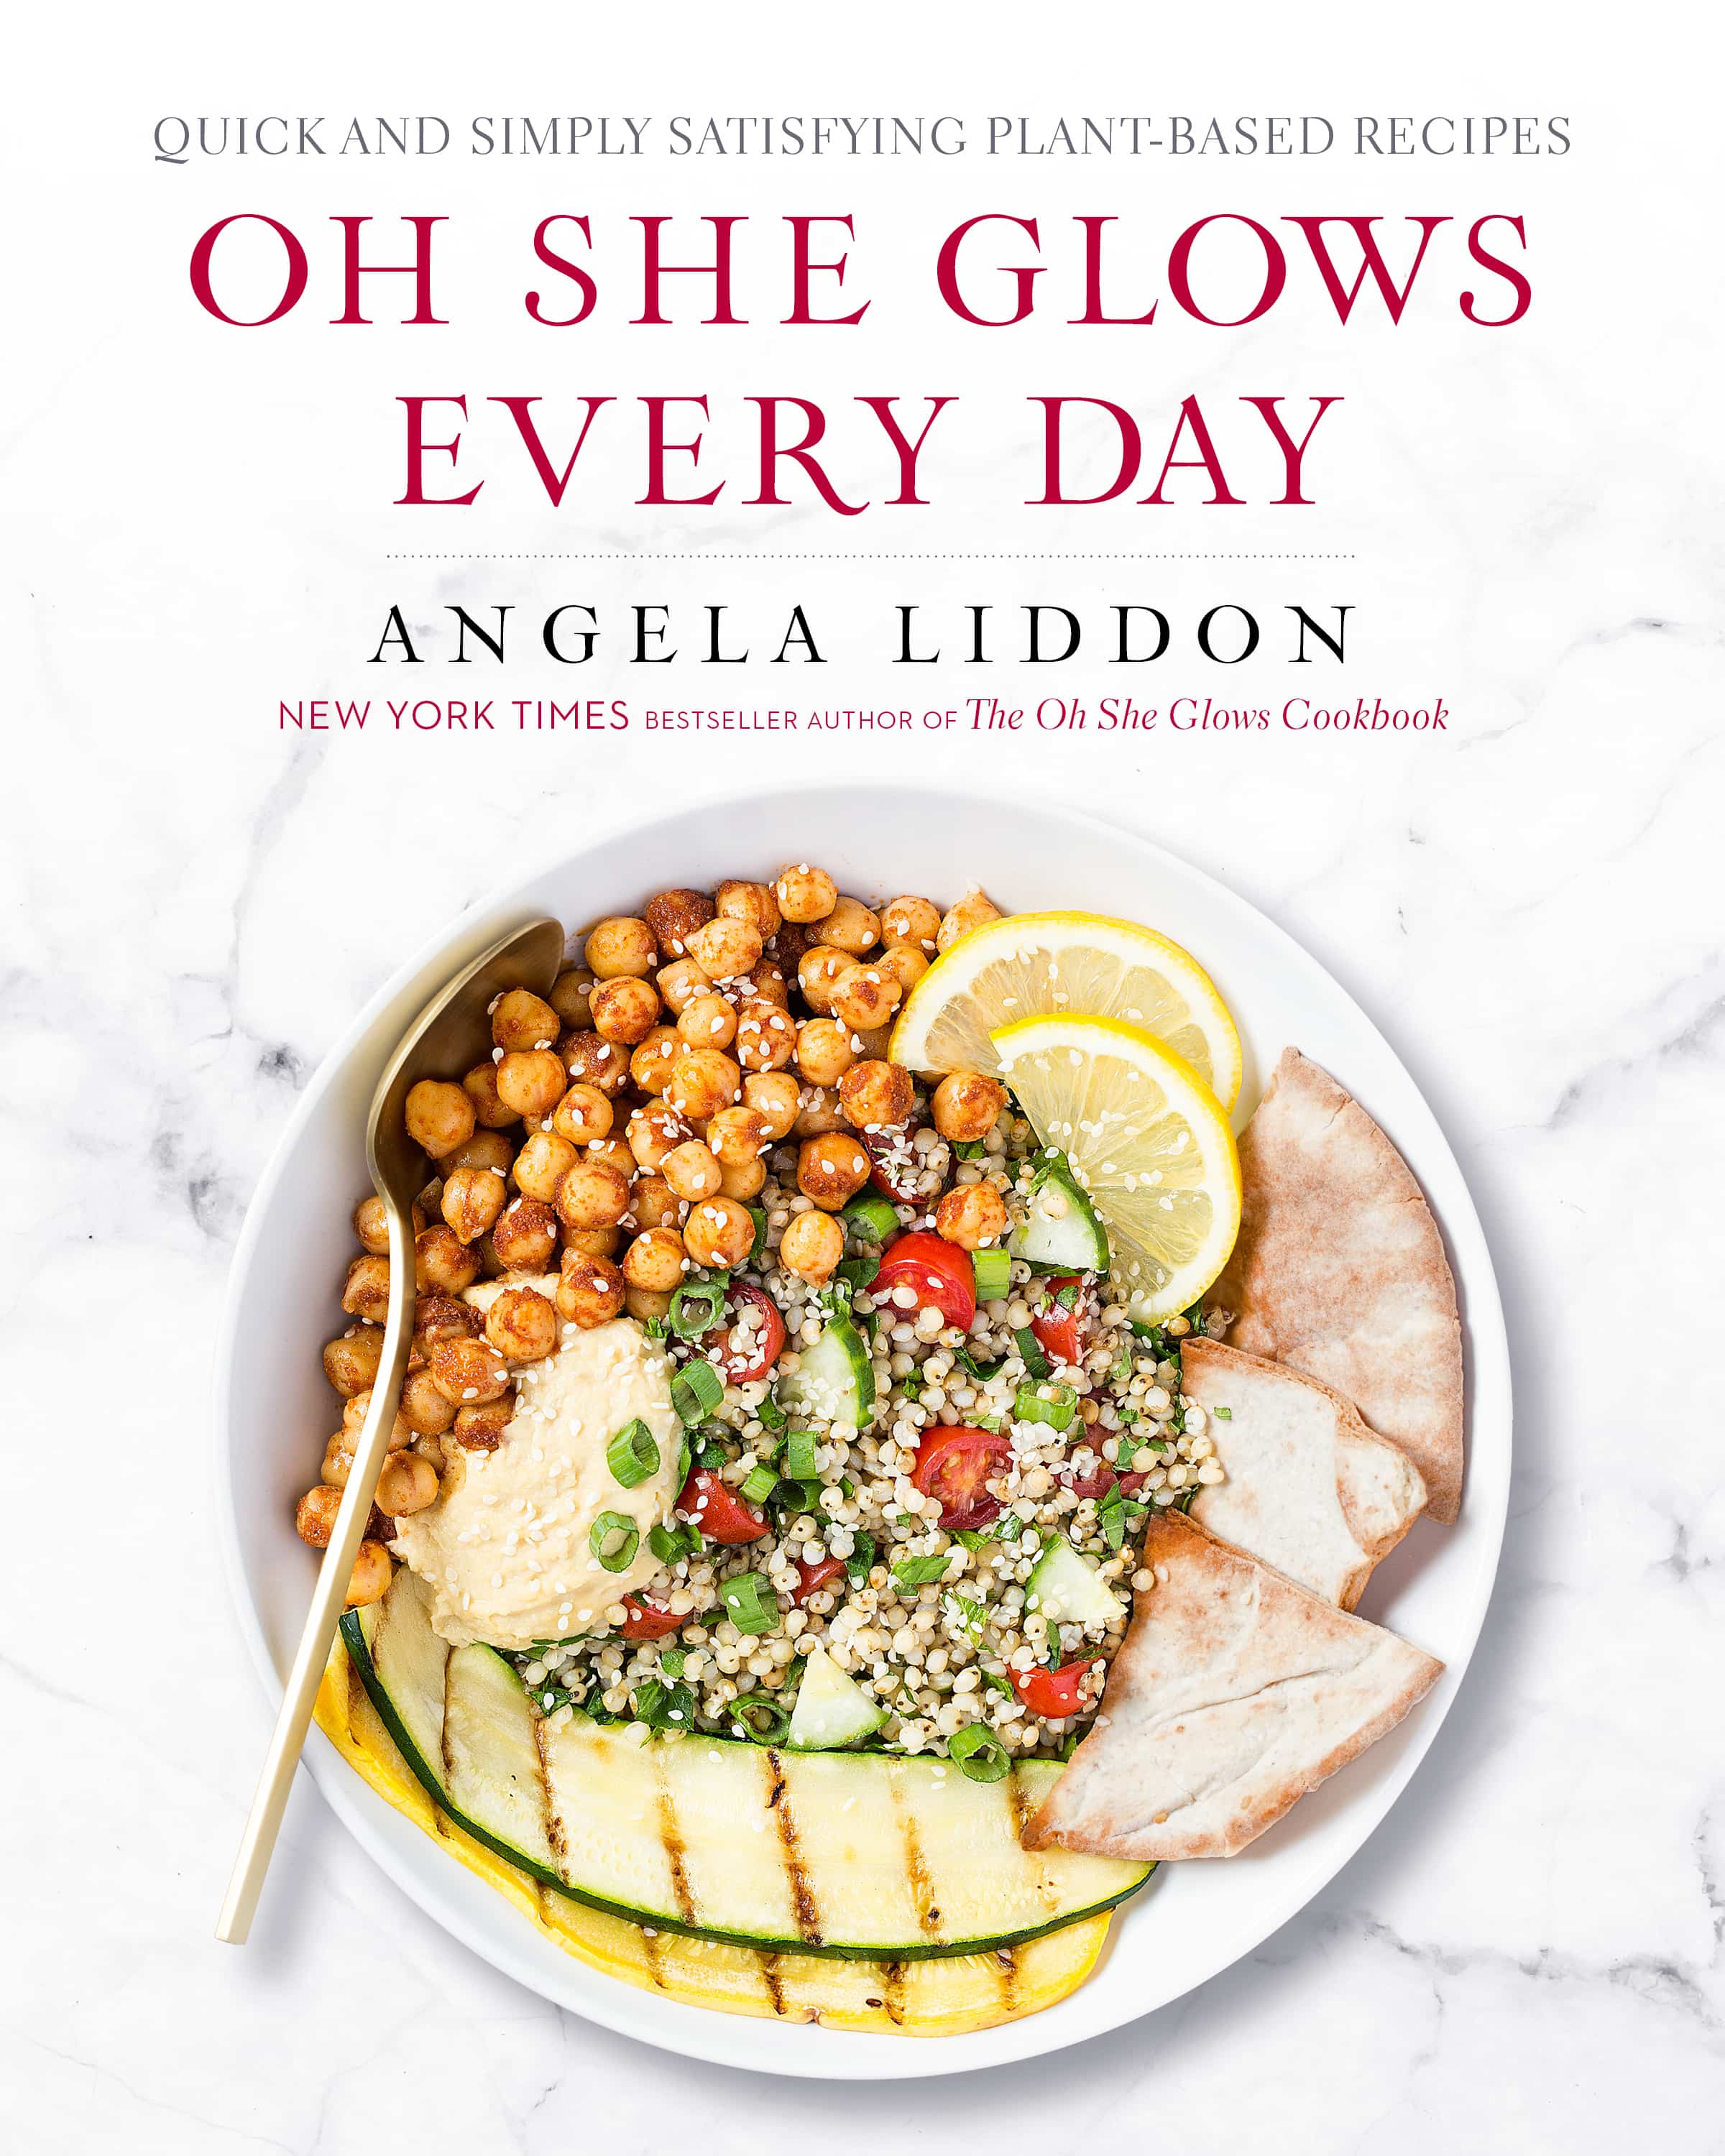 Oh She Glows Everyday cookbook cover